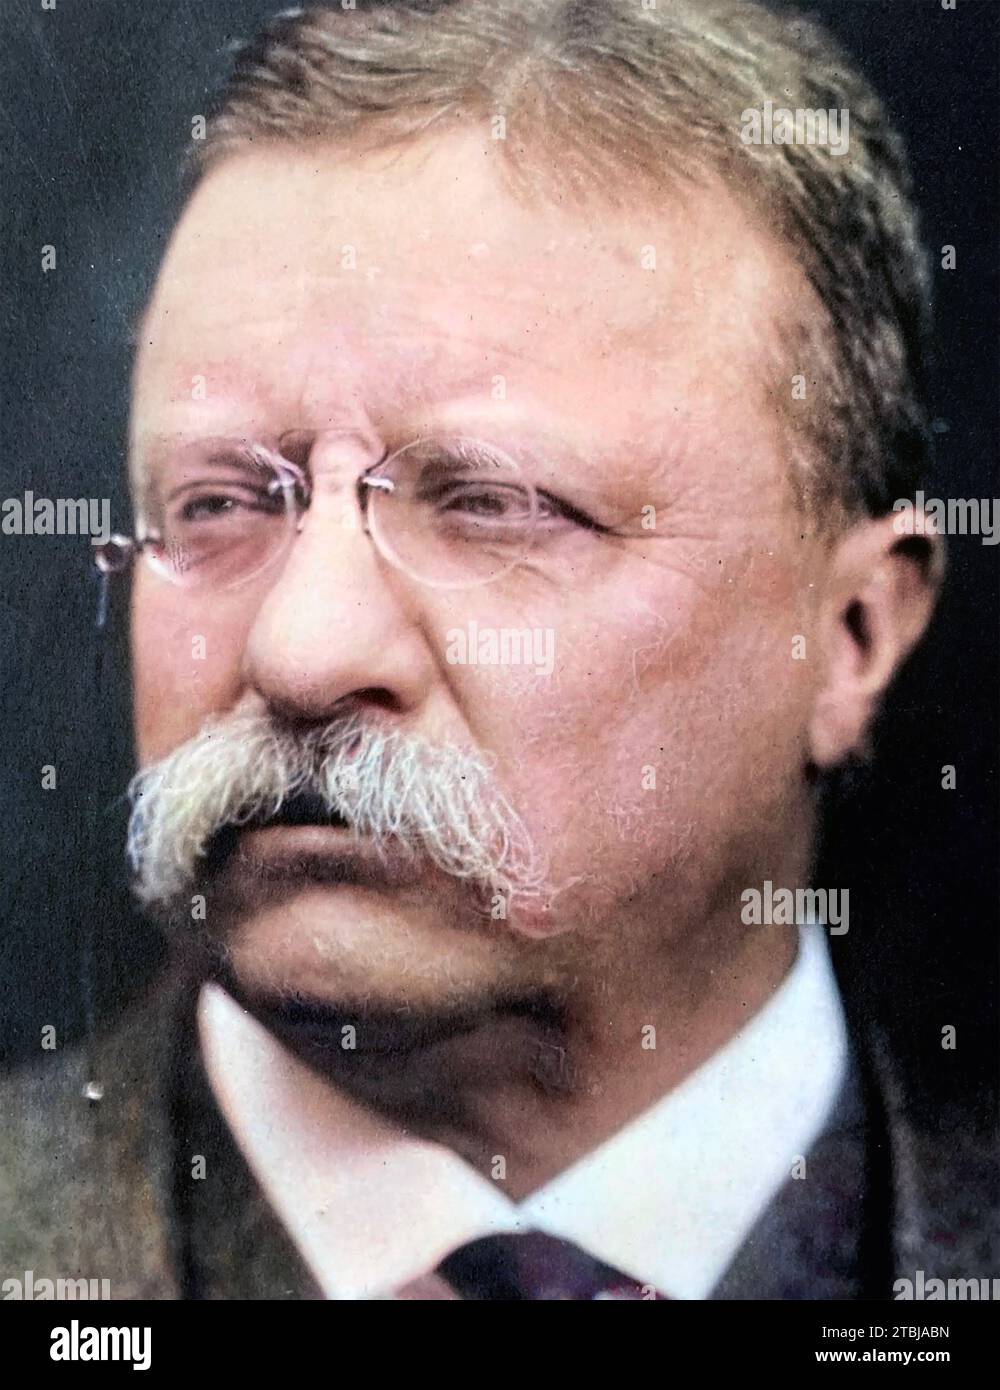 THEODORE ROOSEVELT (1858-1919)  President of the United States, about 1905 Stock Photo